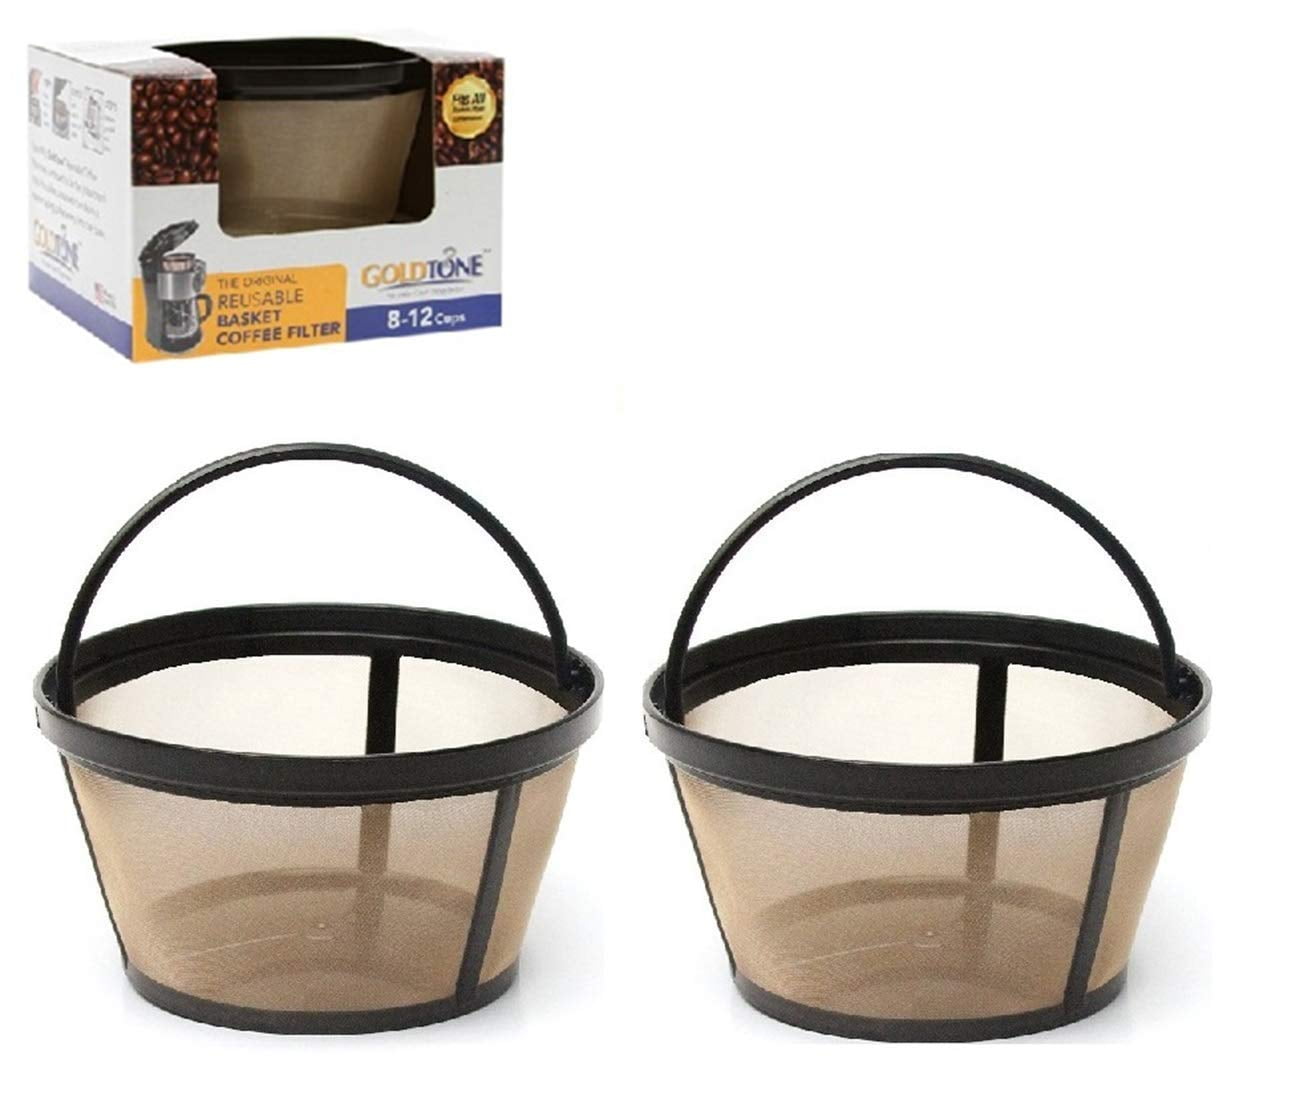 GoldTone Reusable 8-12 Cup Basket Coffee Filter fits Cuisinart Coffee Makers. 